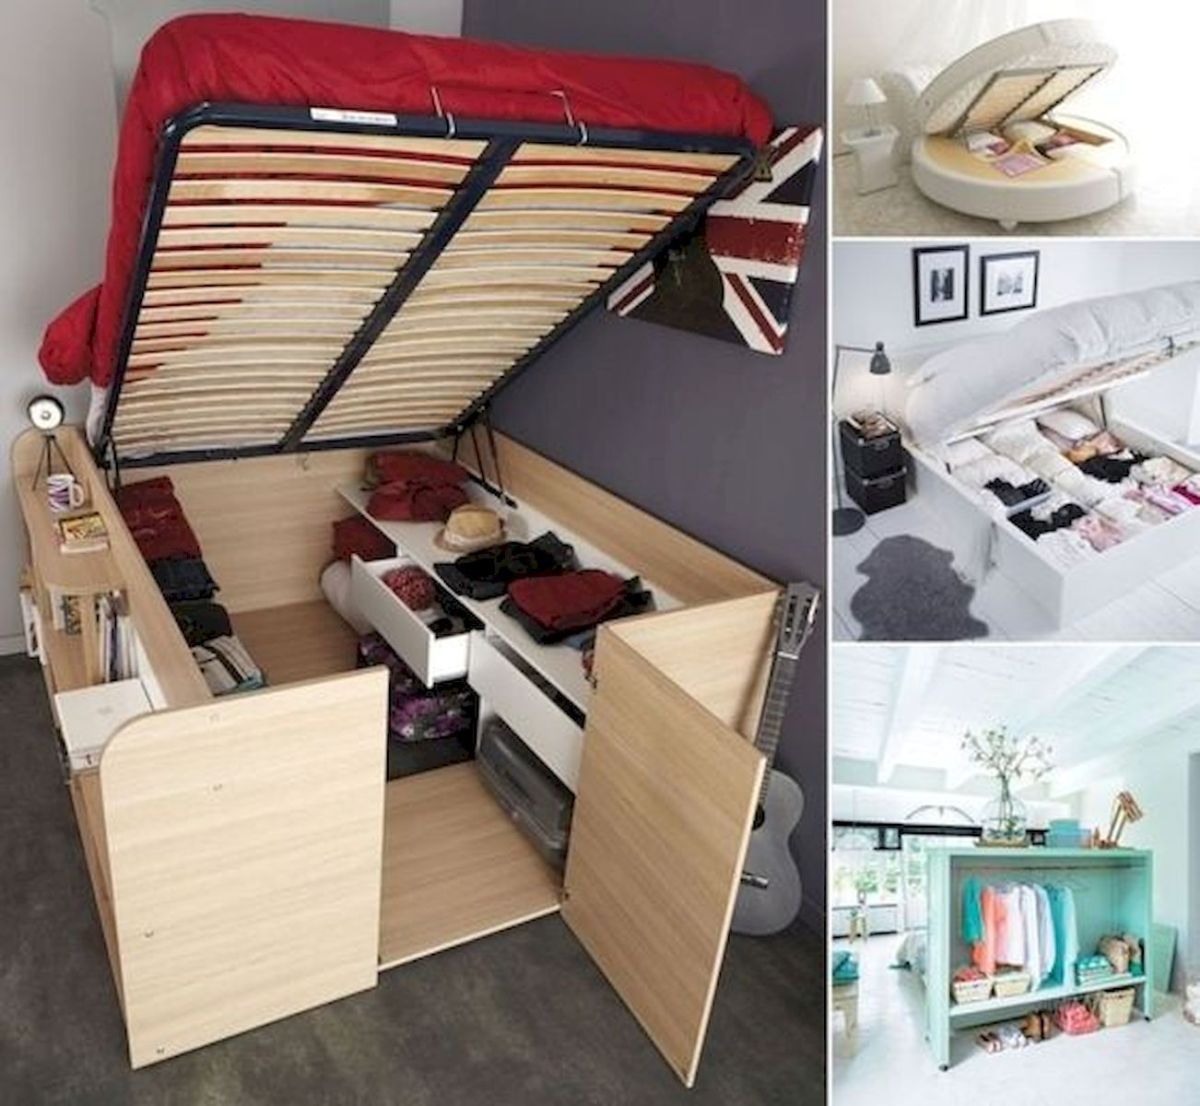 Space-Saving Furniture for Small Bedroom Spaces